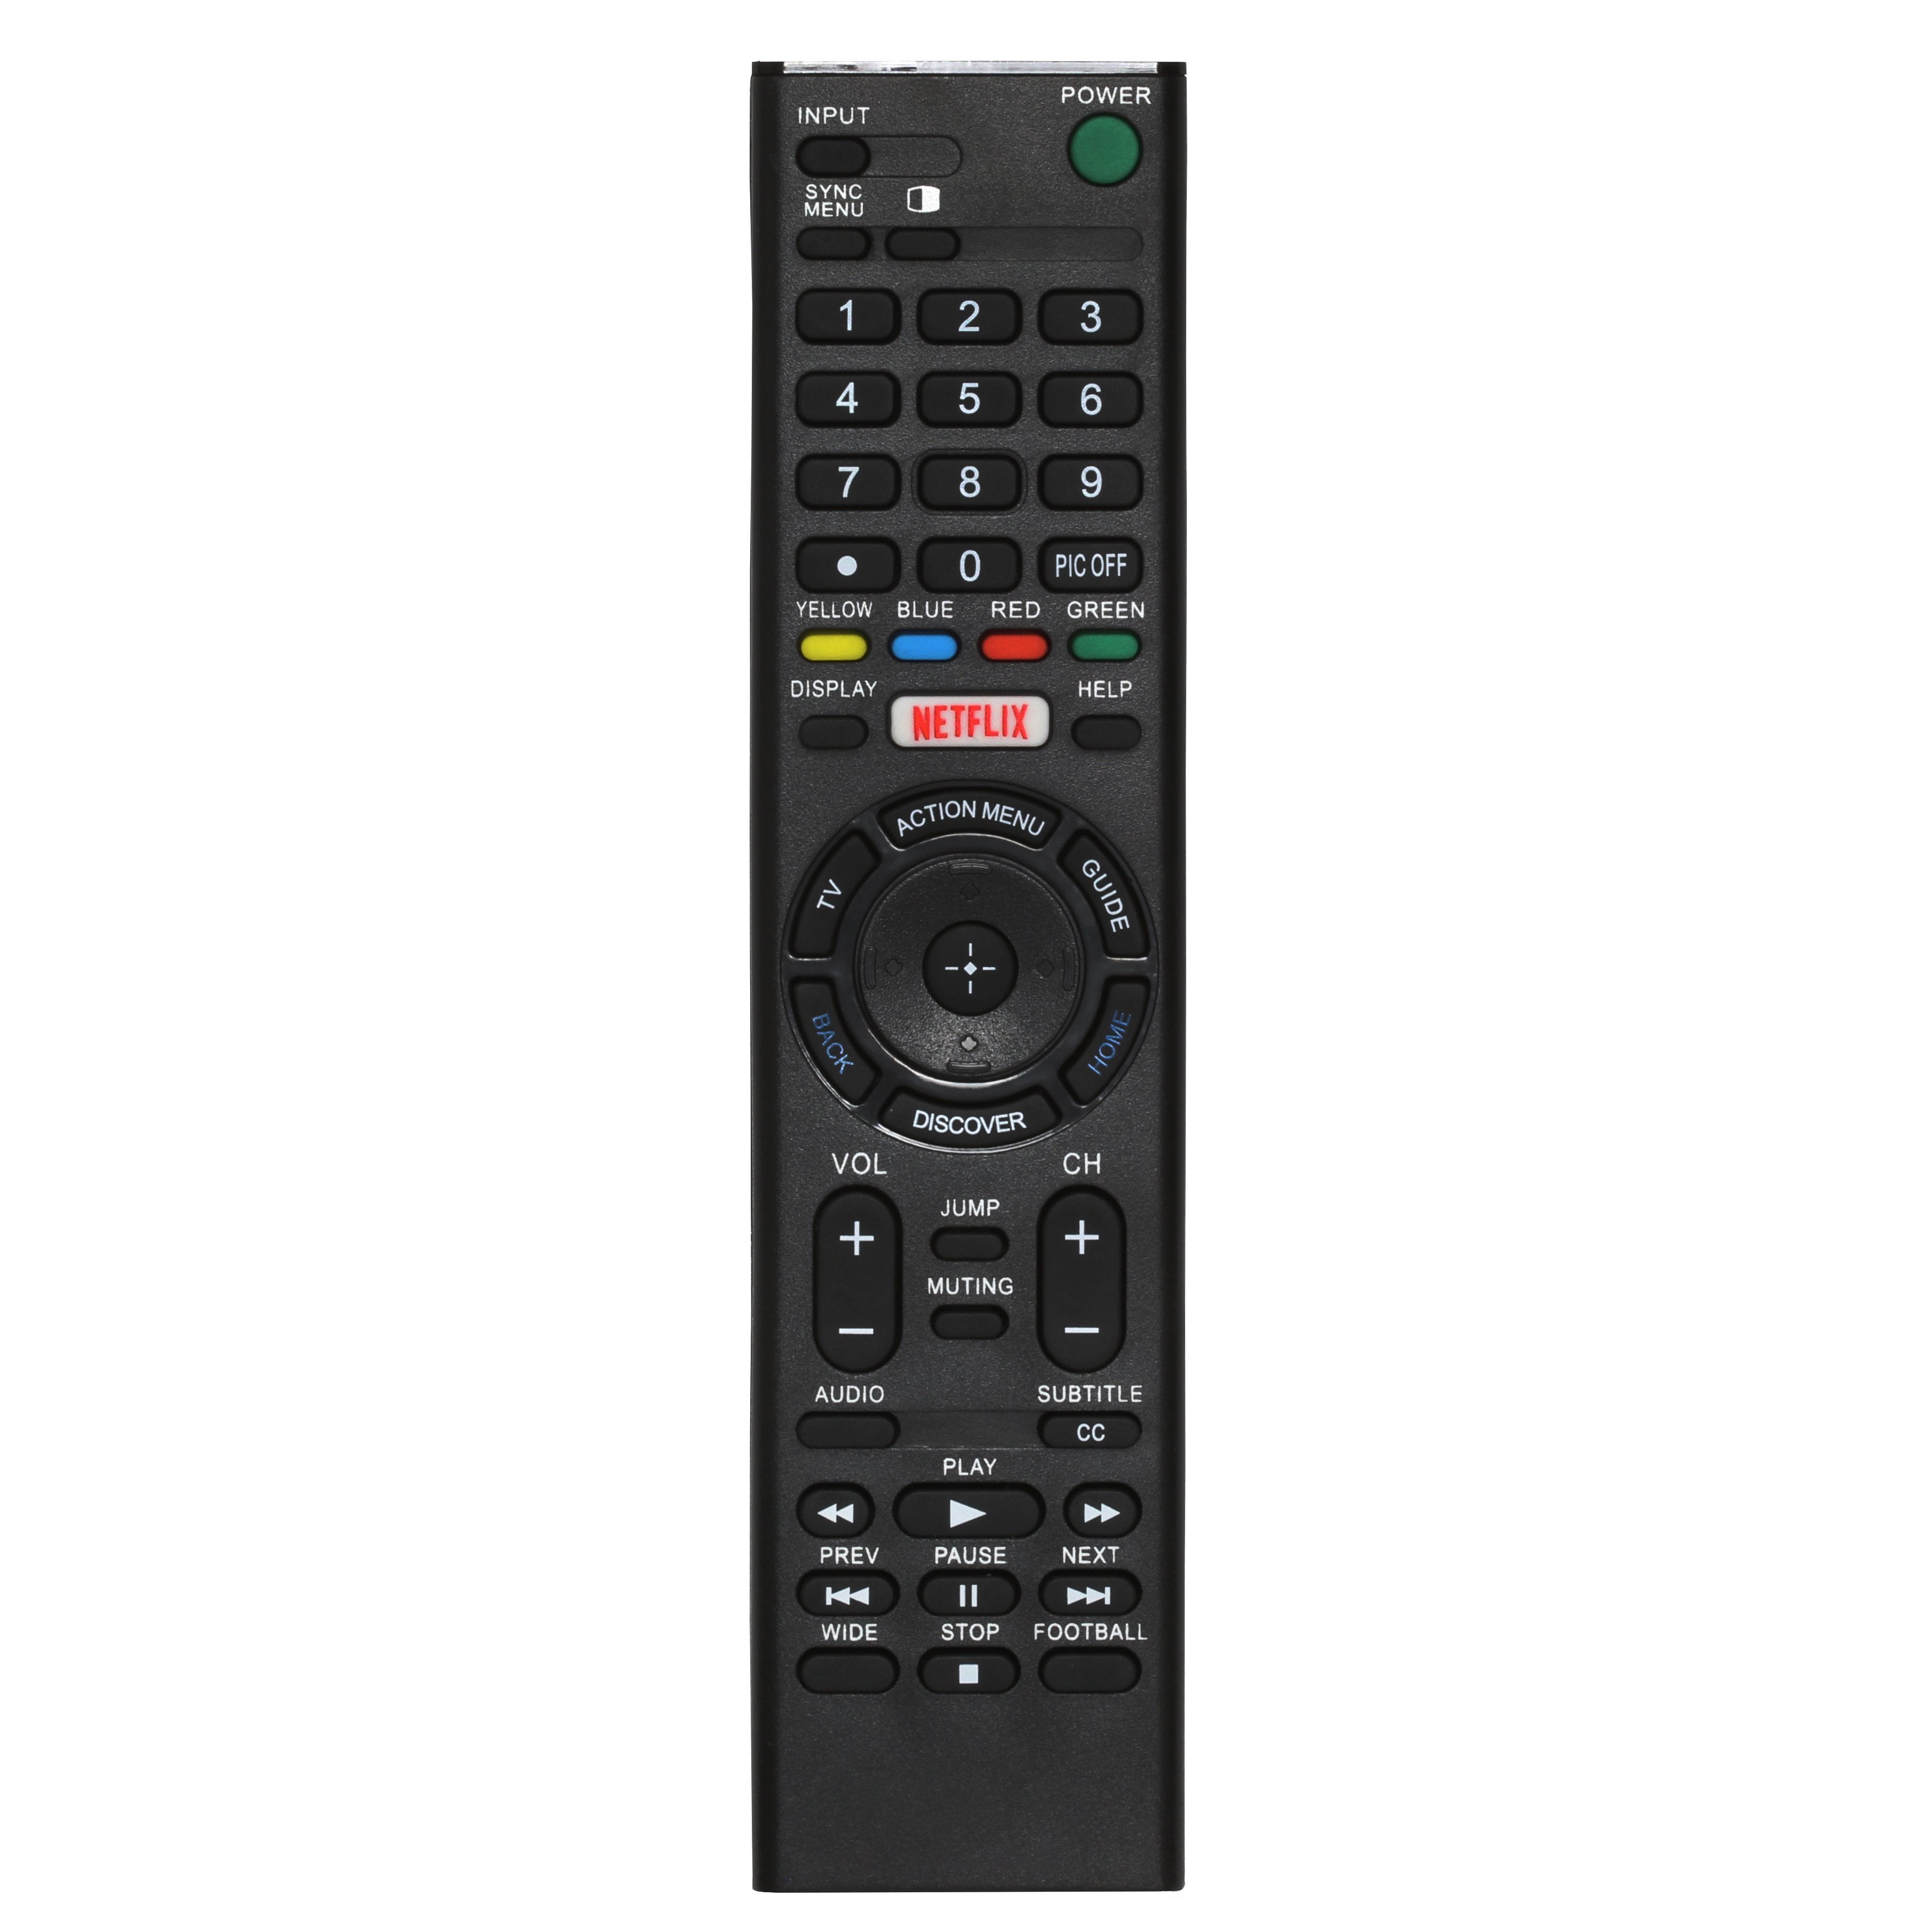 Sony KE42XBR900 Replacement TV Remote Control